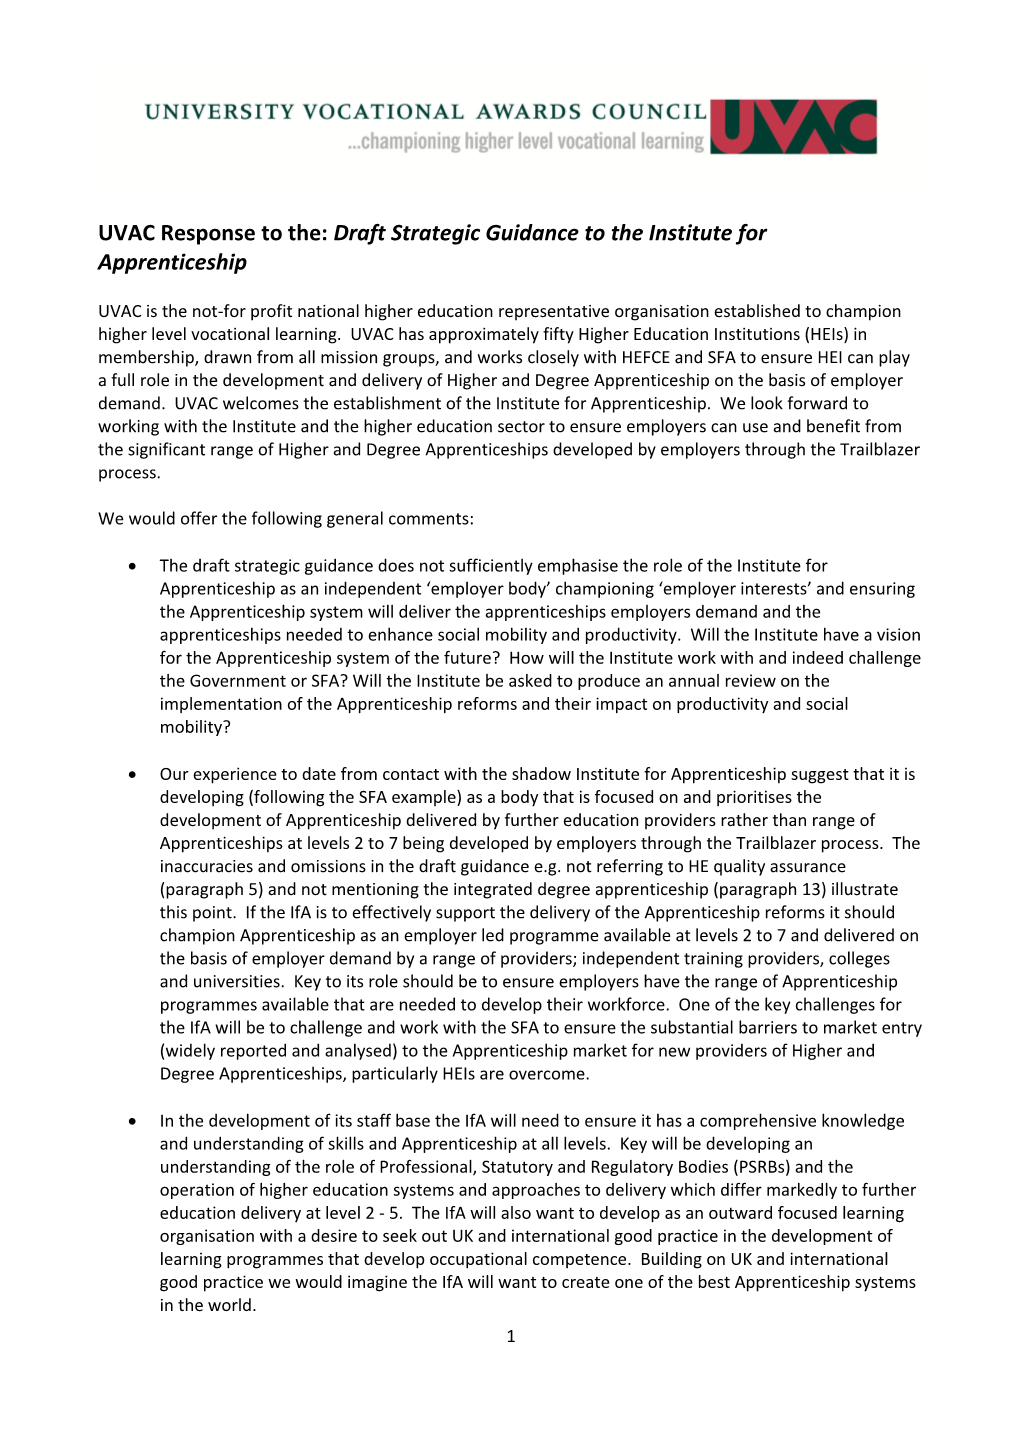 UVAC Response to The:Draft Strategic Guidance to the Institute for Apprenticeship